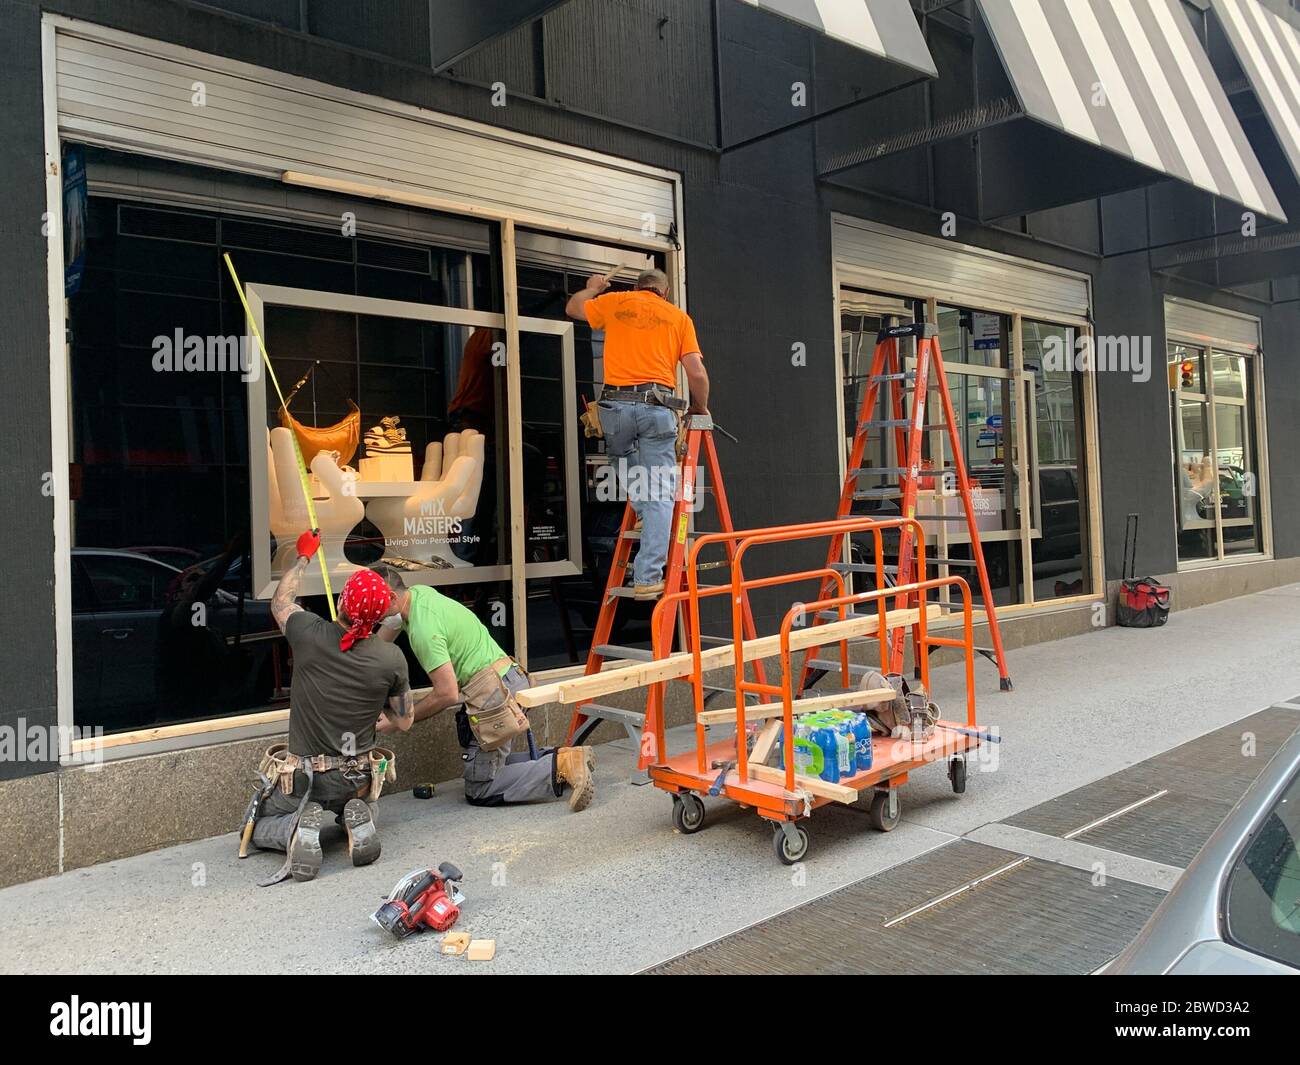 New York, New York, USA. 31st May, 2020. (NEW) Stores are covering up with woods against protests . May 31, 2020, New York, USA: As the protests in favor of George Floyd continue in new York with their riots, destructions and looting some stores are now covering up with woods to prevent protesters from entering.Credit: Niyi Fote /Thenews2. Credit: Niyi Fote/TheNEWS2/ZUMA Wire/Alamy Live News Stock Photo